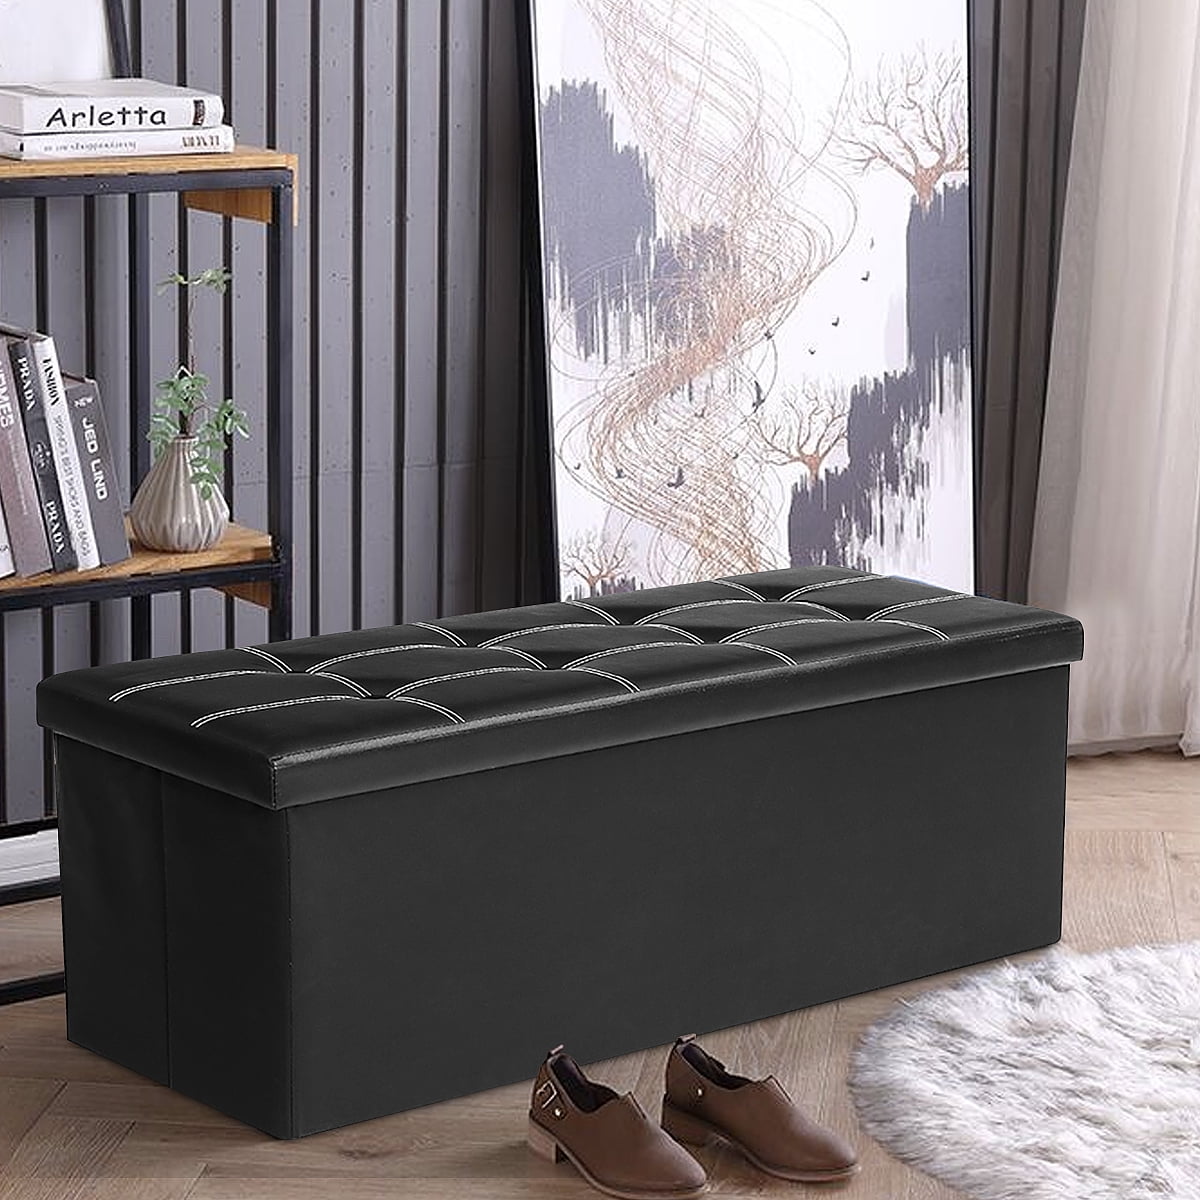 Double Seater Ottoman Storage Box Bench Stool Cube Seat Padded Seat/Foldable 